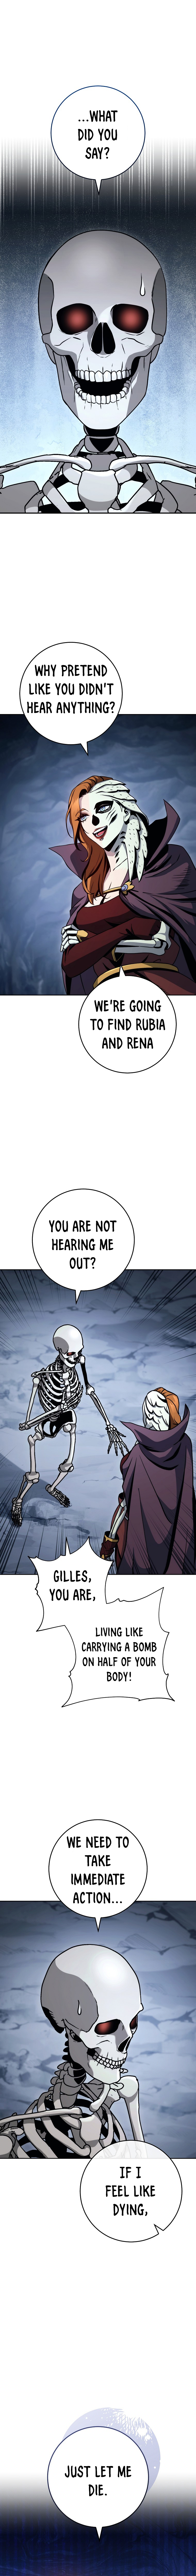 Skeleton Soldier chapter 243 page 2